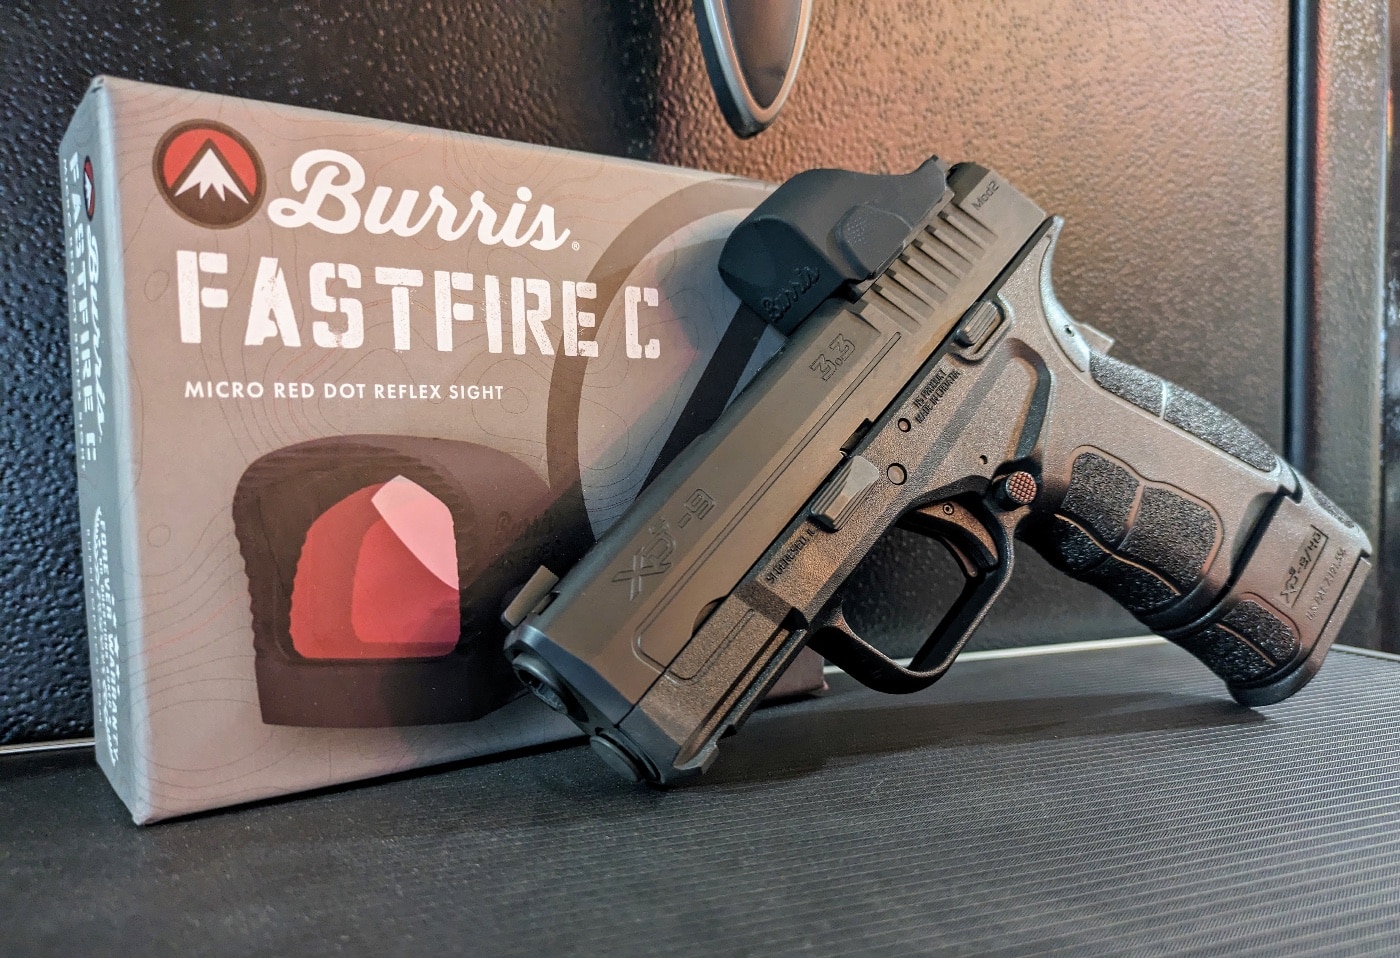 Burris FastFire C is designed for concealed carry pistols. It is relatively light and rugged while providing an excellent aiming dot at an affordable price. The protective lens hood incorporates serrations on the front edge to deliver no-slip performance. It is also water-resistant to be ready for anything.